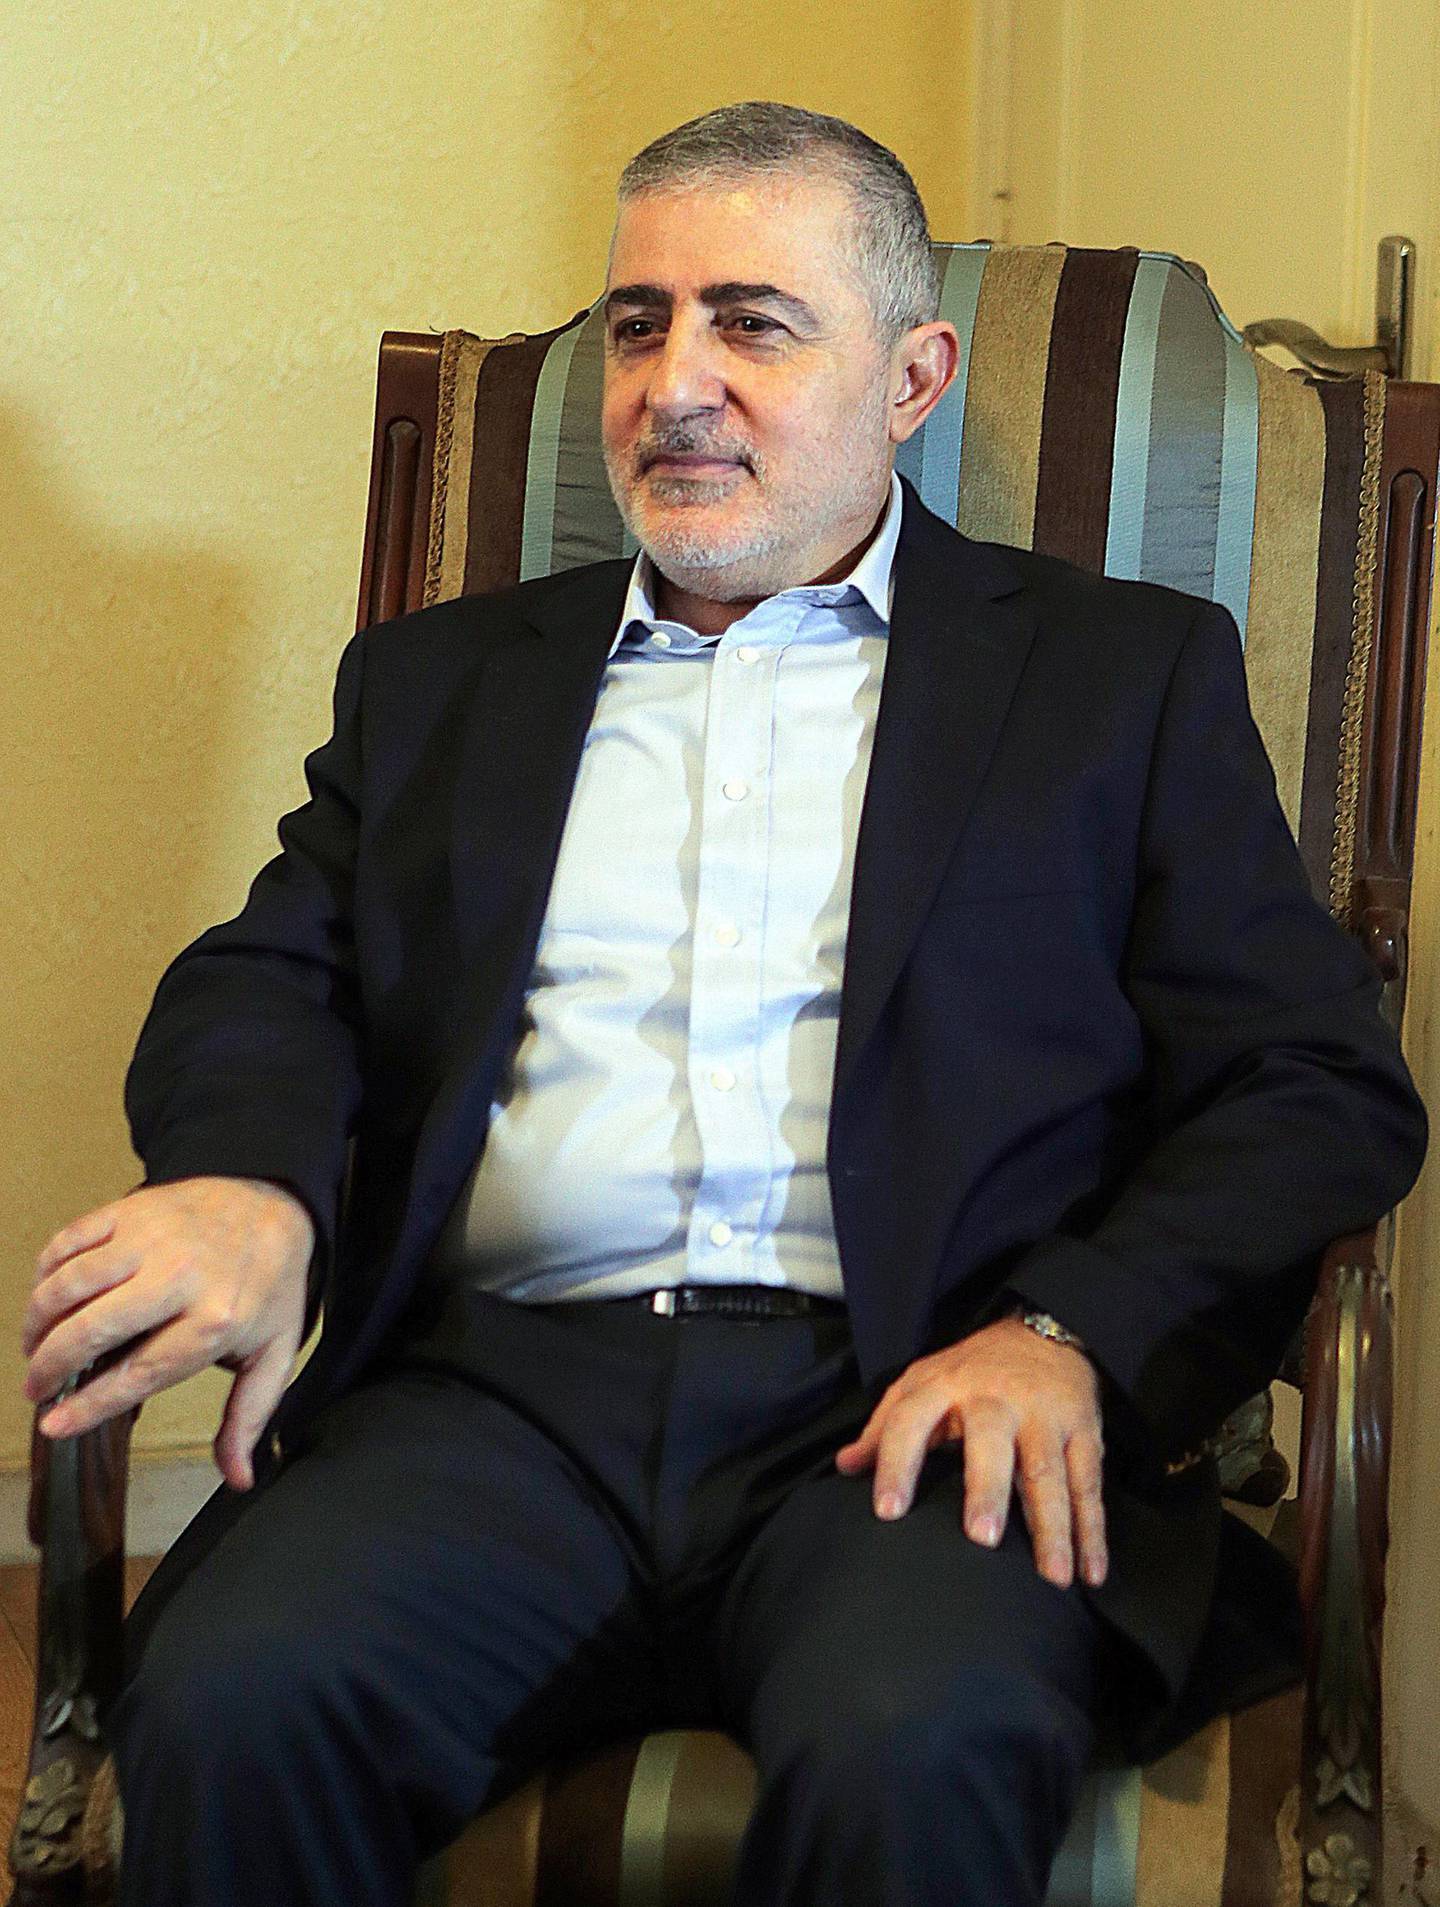 This file photo taken on April 12, 2018 shows Senior Hezbollah security official Wafiq Safa at his office in the Lebanese capital Beirut. The US on July 9 imposed sanctions against three Hezbollah officials, including two lawmakers, marking the first time the it has placed elected officials from the powerful Shiite movement on its blacklist. Lawmakers Amin Sherri and Muhammad Hasan Raad were accused of "exploiting Lebanon's political and financial system" to benefit Hezbollah, according to a statement from the US Treasury. Also placed on the blacklist was Wafiq Safa, a top Hezbollah security official close to the movement's Secretary General Hassan Nasrallah. / AFP / -
